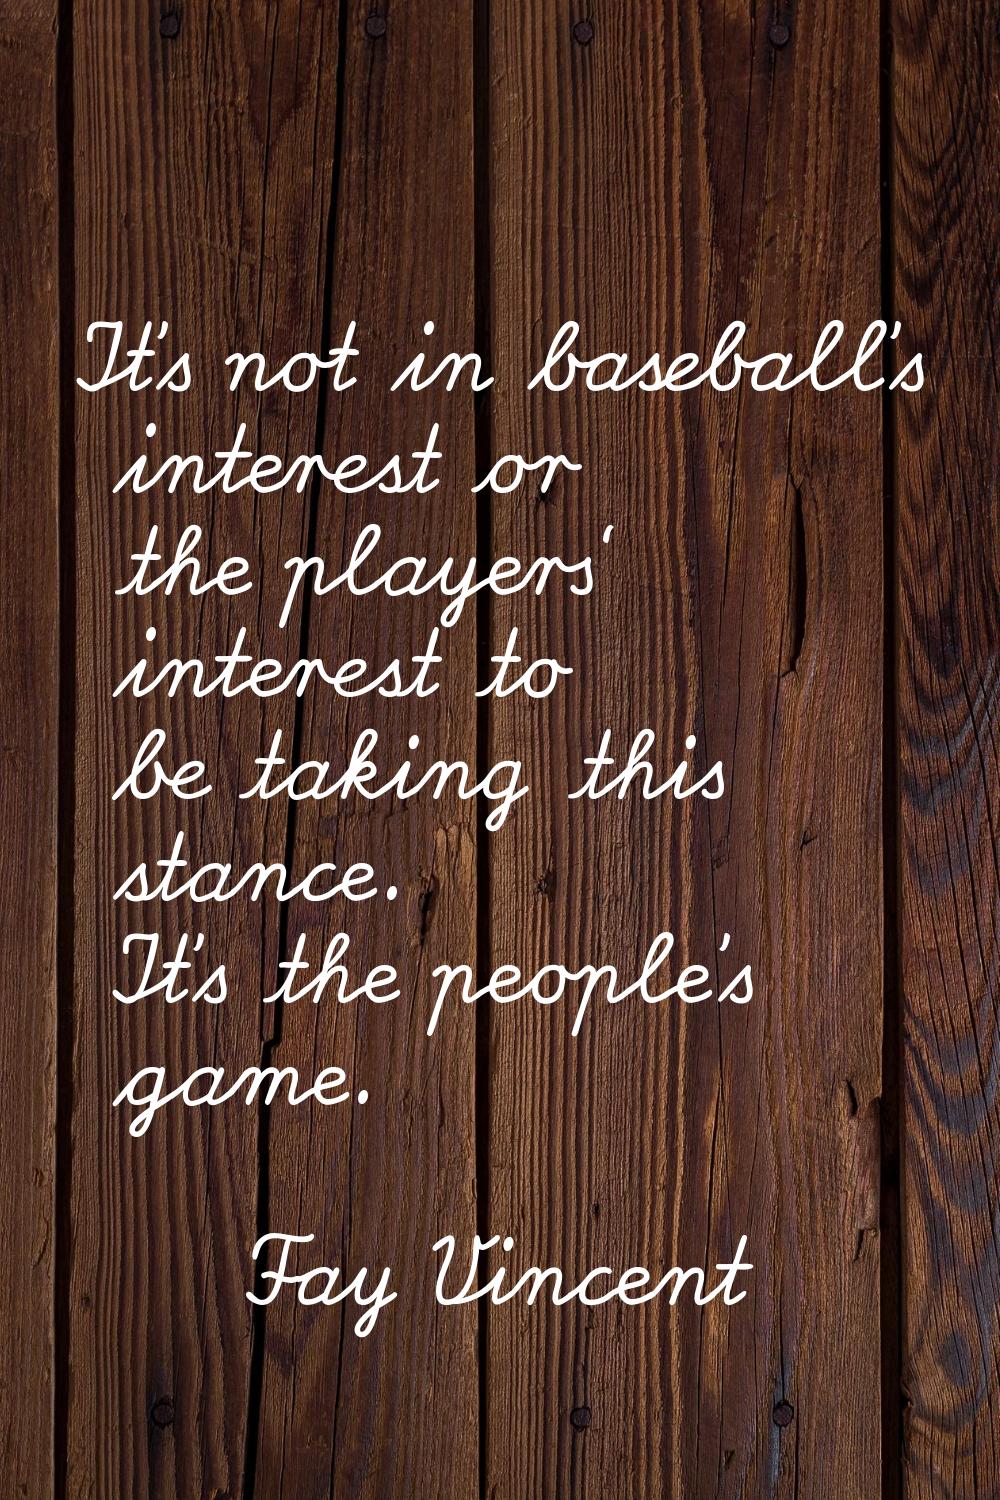 It's not in baseball's interest or the players' interest to be taking this stance. It's the people'